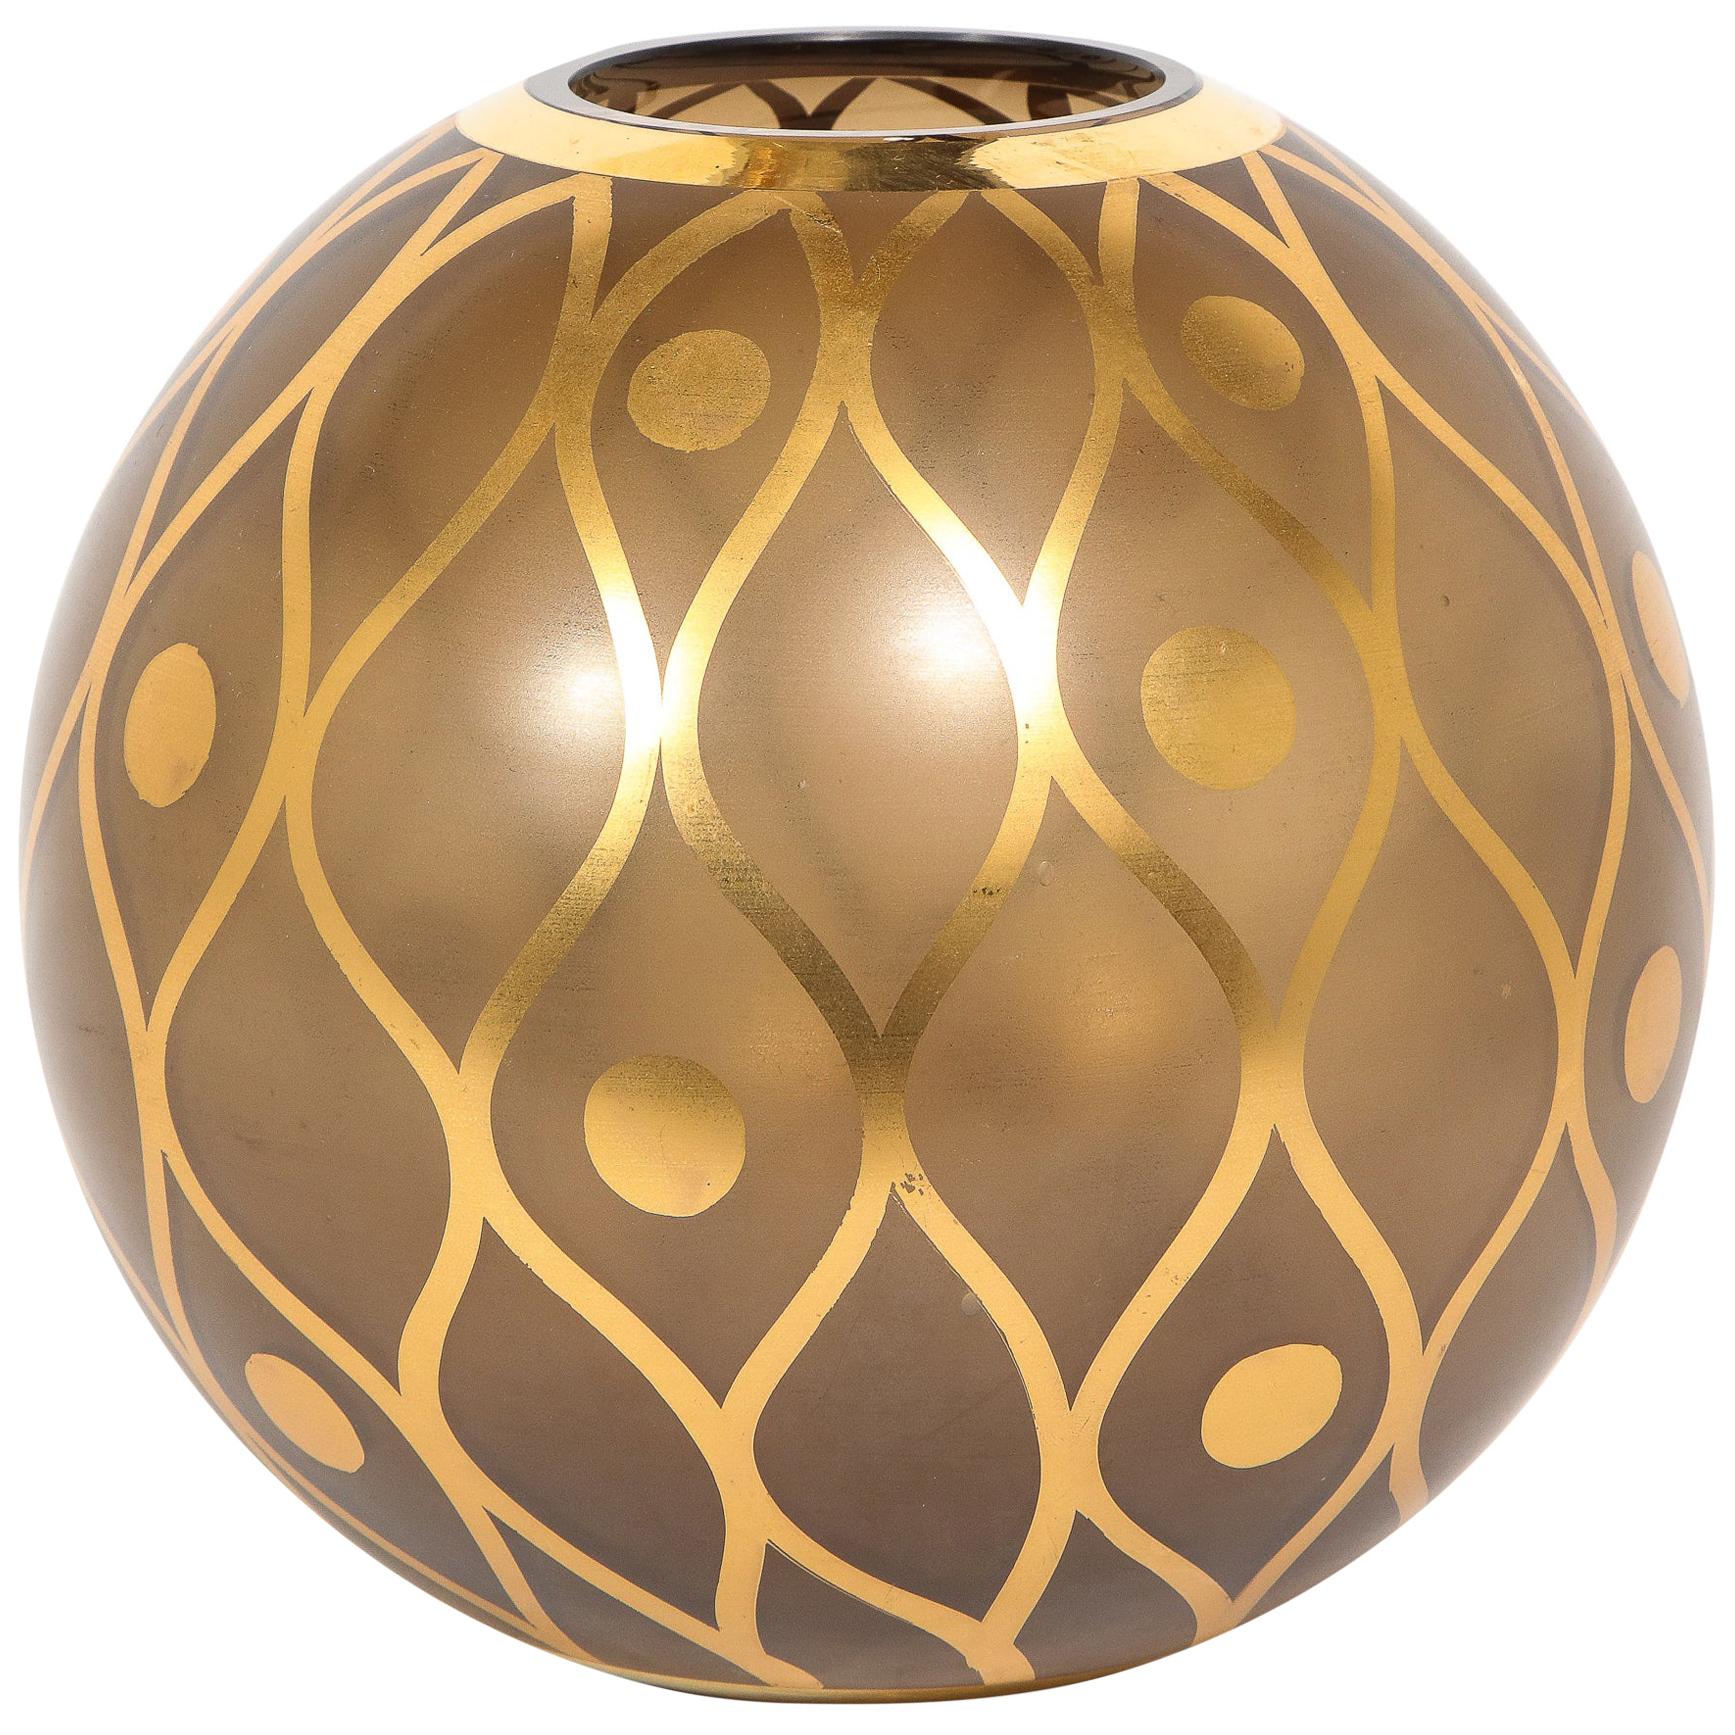 Mid-Century Modern Spherical Smoked Glass Vase with Curvilinear Gilded Detailing